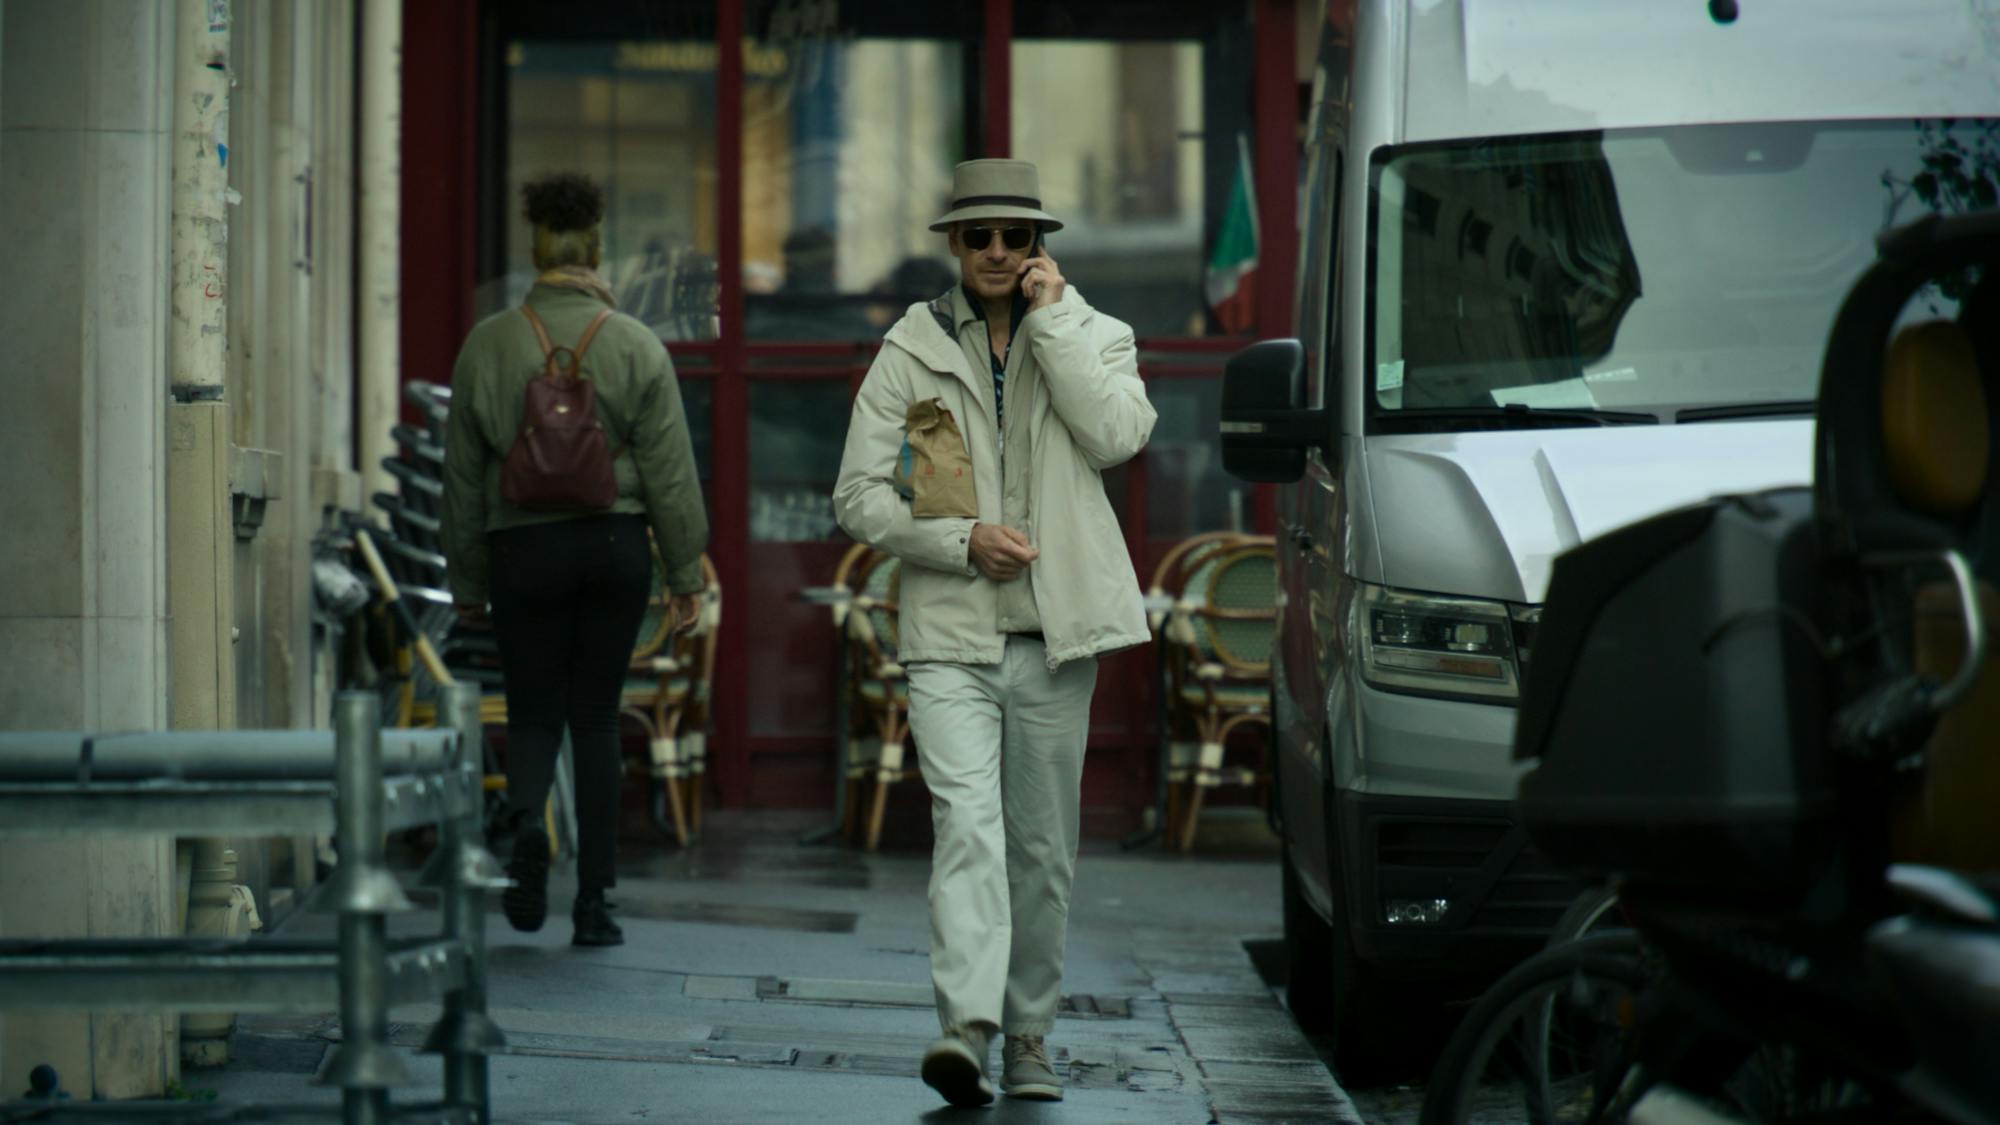 The Killer (Michael Fassbender) in The Killer walks through a street wearing a beige outfit.